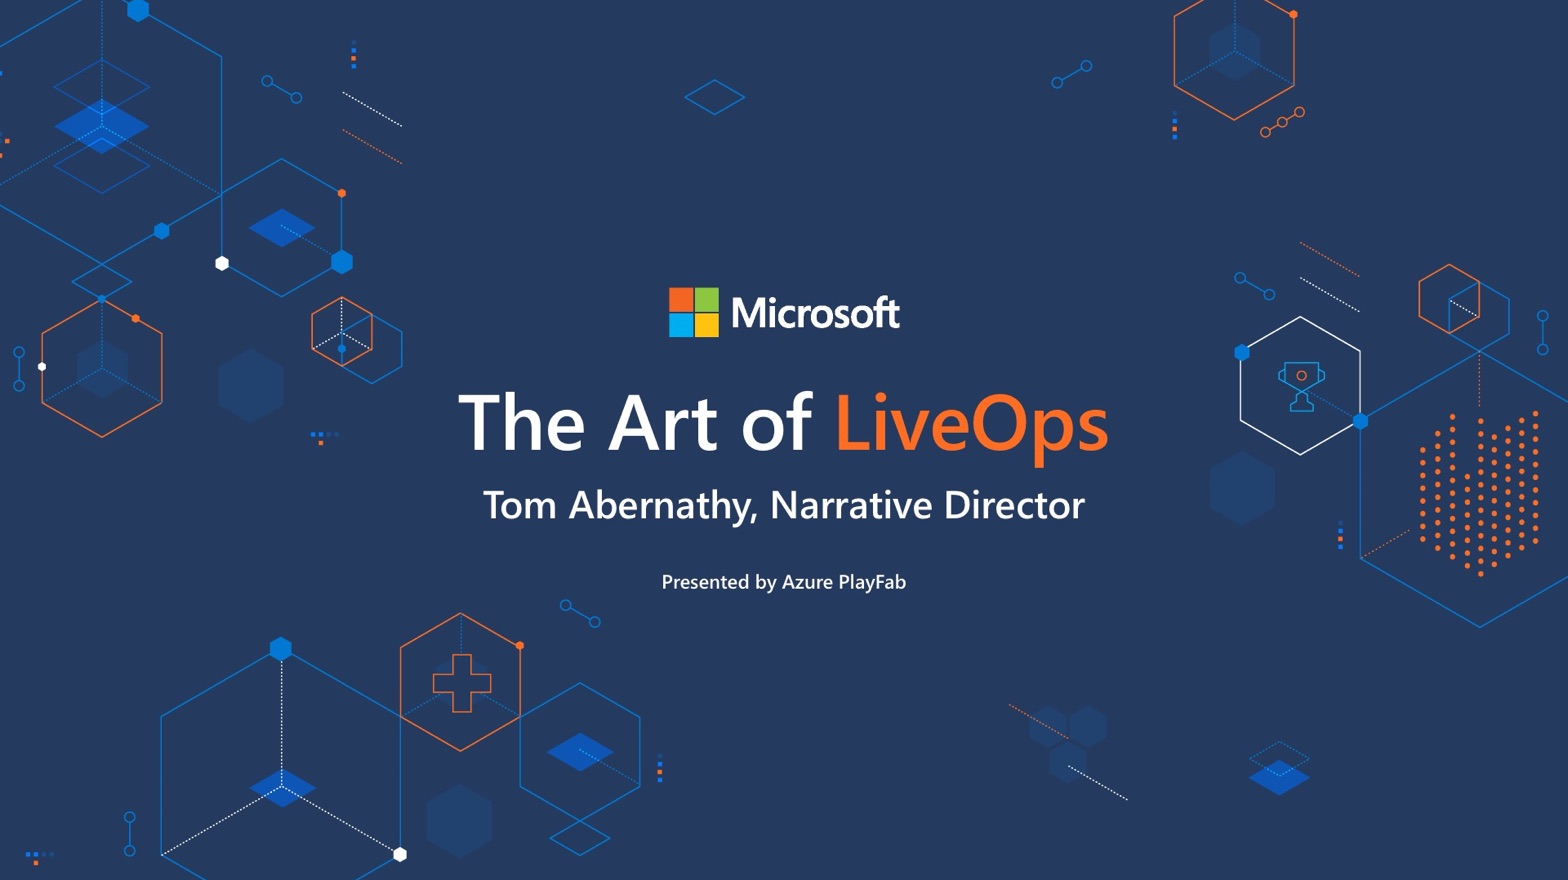 Hero image for The Art of LiveOps reheat post with Tom Abernathy